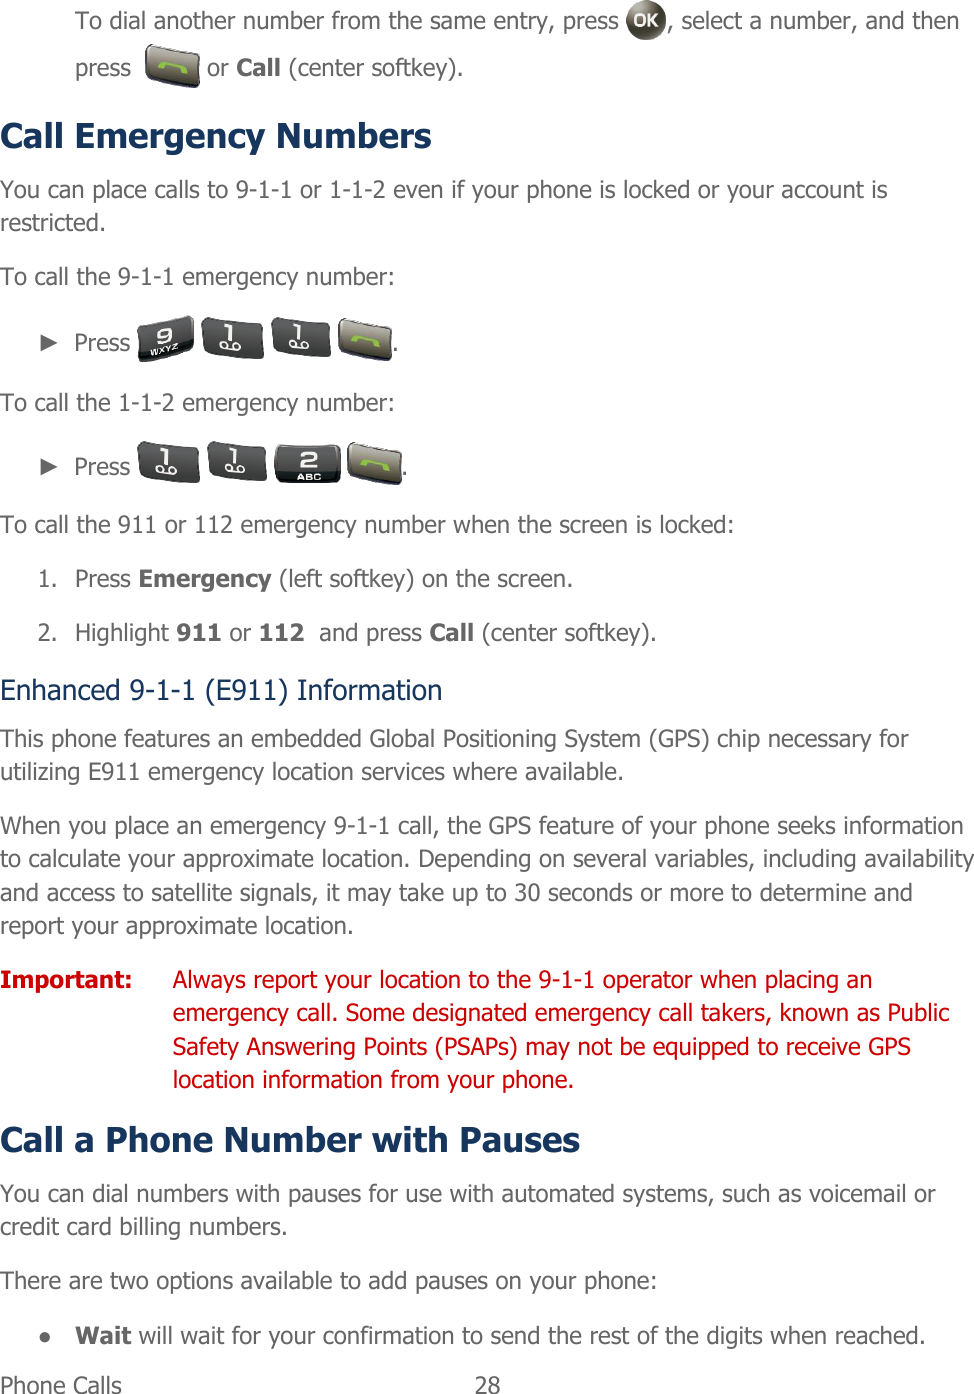  Phone Calls   28   To dial another number from the same entry, press  , select a number, and then press    or Call (center softkey). Call Emergency Numbers You can place calls to 9-1-1 or 1-1-2 even if your phone is locked or your account is restricted. To call the 9-1-1 emergency number: ► Press        . To call the 1-1-2 emergency number: ► Press        . To call the 911 or 112 emergency number when the screen is locked: 1. Press Emergency (left softkey) on the screen. 2. Highlight 911 or 112  and press Call (center softkey). Enhanced 9-1-1 (E911) Information This phone features an embedded Global Positioning System (GPS) chip necessary for utilizing E911 emergency location services where available. When you place an emergency 9-1-1 call, the GPS feature of your phone seeks information to calculate your approximate location. Depending on several variables, including availability and access to satellite signals, it may take up to 30 seconds or more to determine and report your approximate location. Important:  Always report your location to the 9-1-1 operator when placing an emergency call. Some designated emergency call takers, known as Public Safety Answering Points (PSAPs) may not be equipped to receive GPS location information from your phone. Call a Phone Number with Pauses You can dial numbers with pauses for use with automated systems, such as voicemail or credit card billing numbers. There are two options available to add pauses on your phone: ● Wait will wait for your confirmation to send the rest of the digits when reached. 